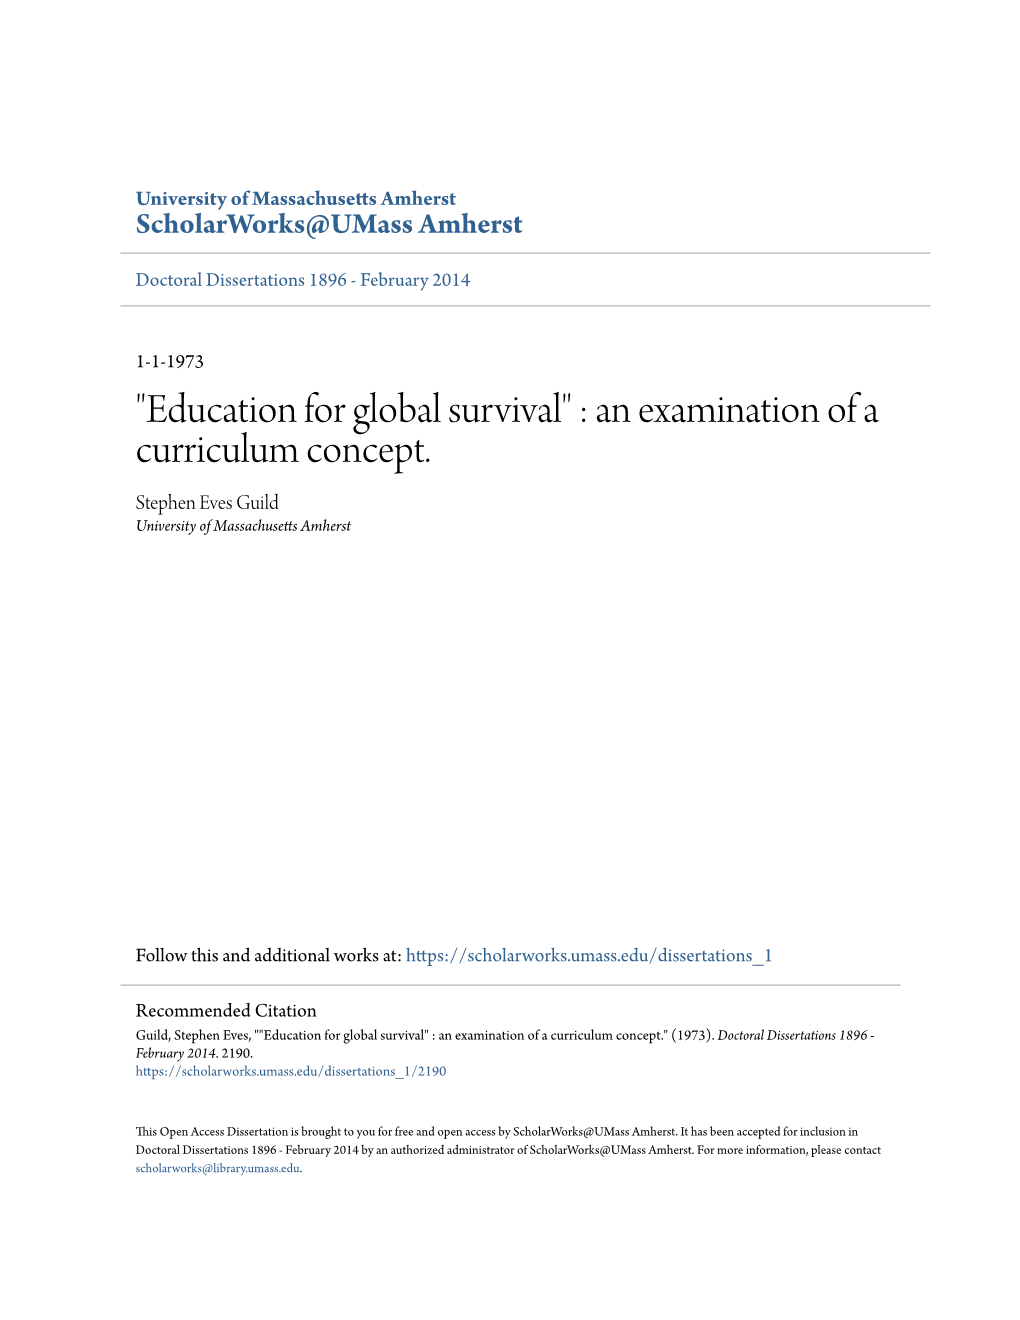 Education for Global Survival" : an Examination of a Curriculum Concept